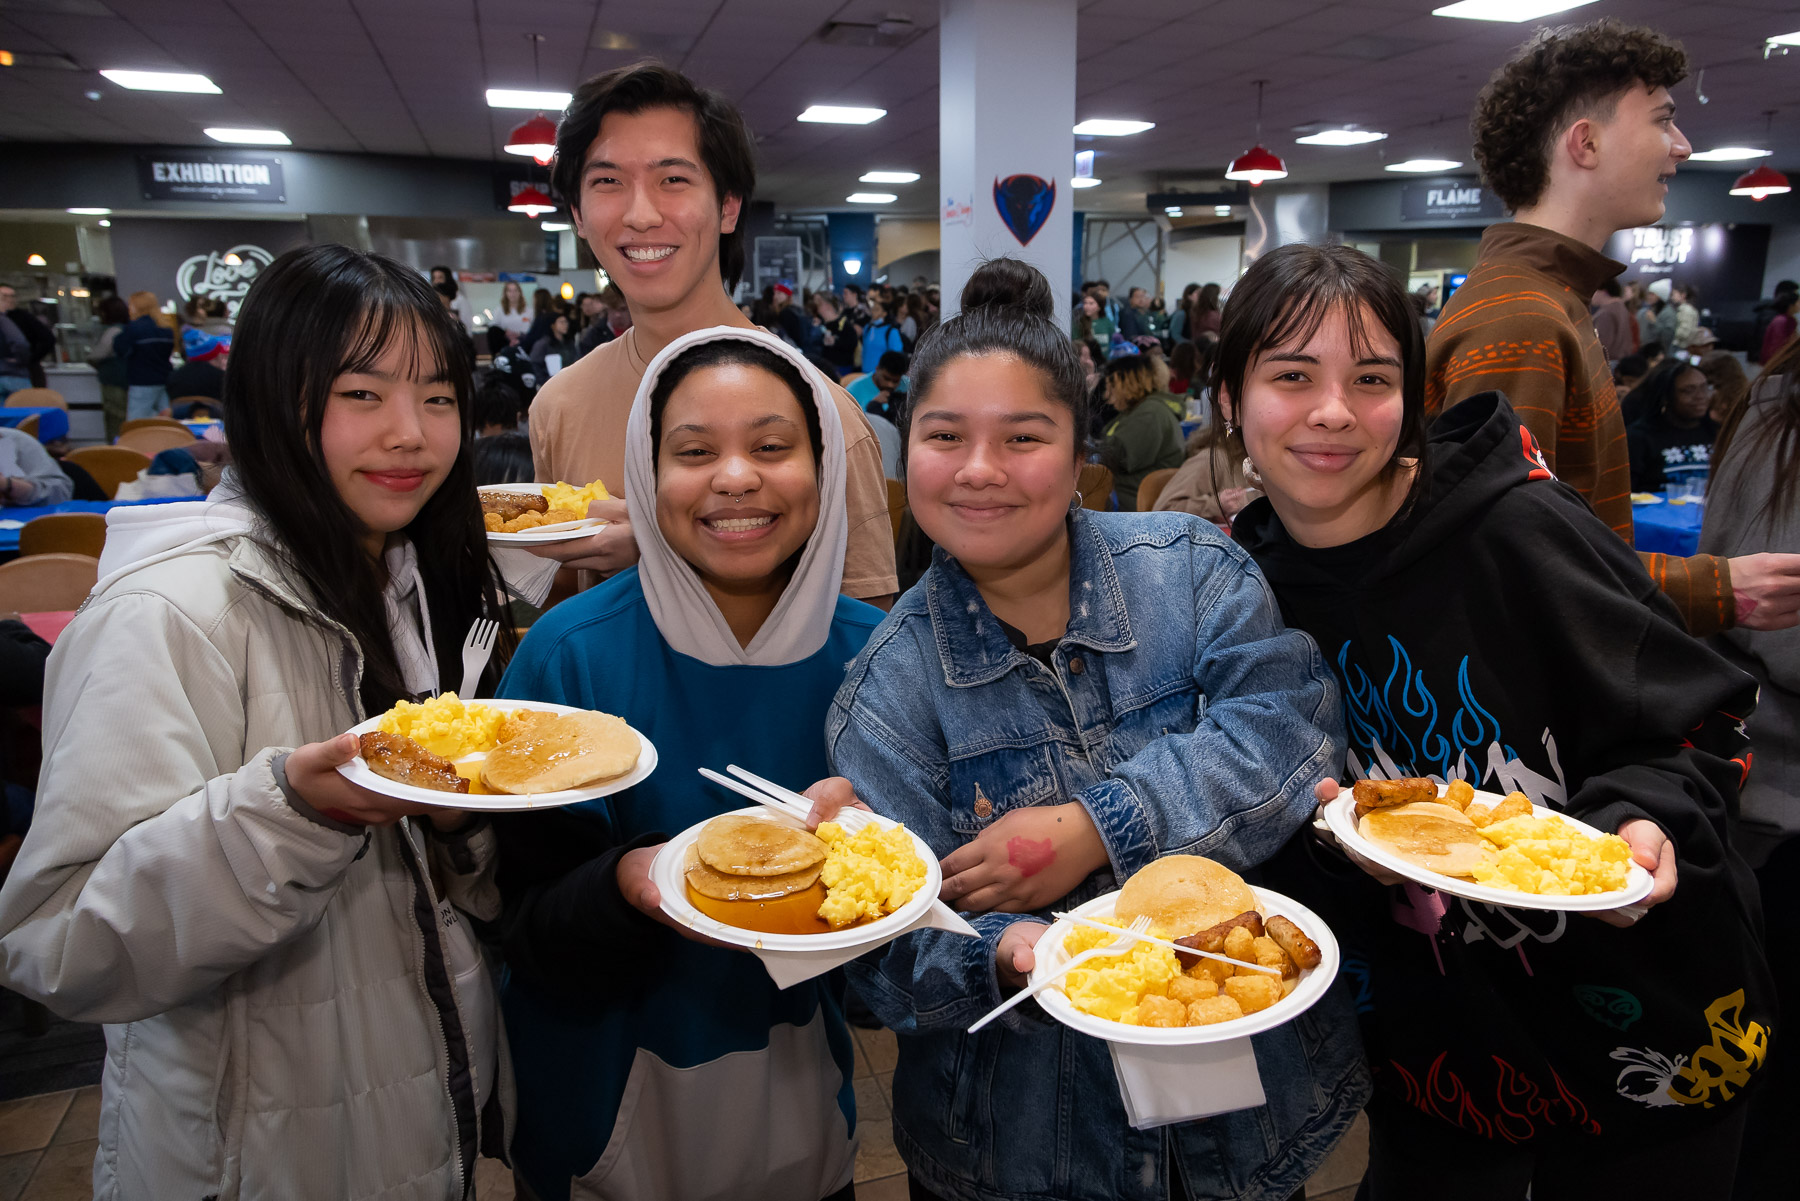 CSH students show off their hearty breakfasts in the Lincoln Park Student Center. (Photo by Jeff Carrion / DePaul University) 